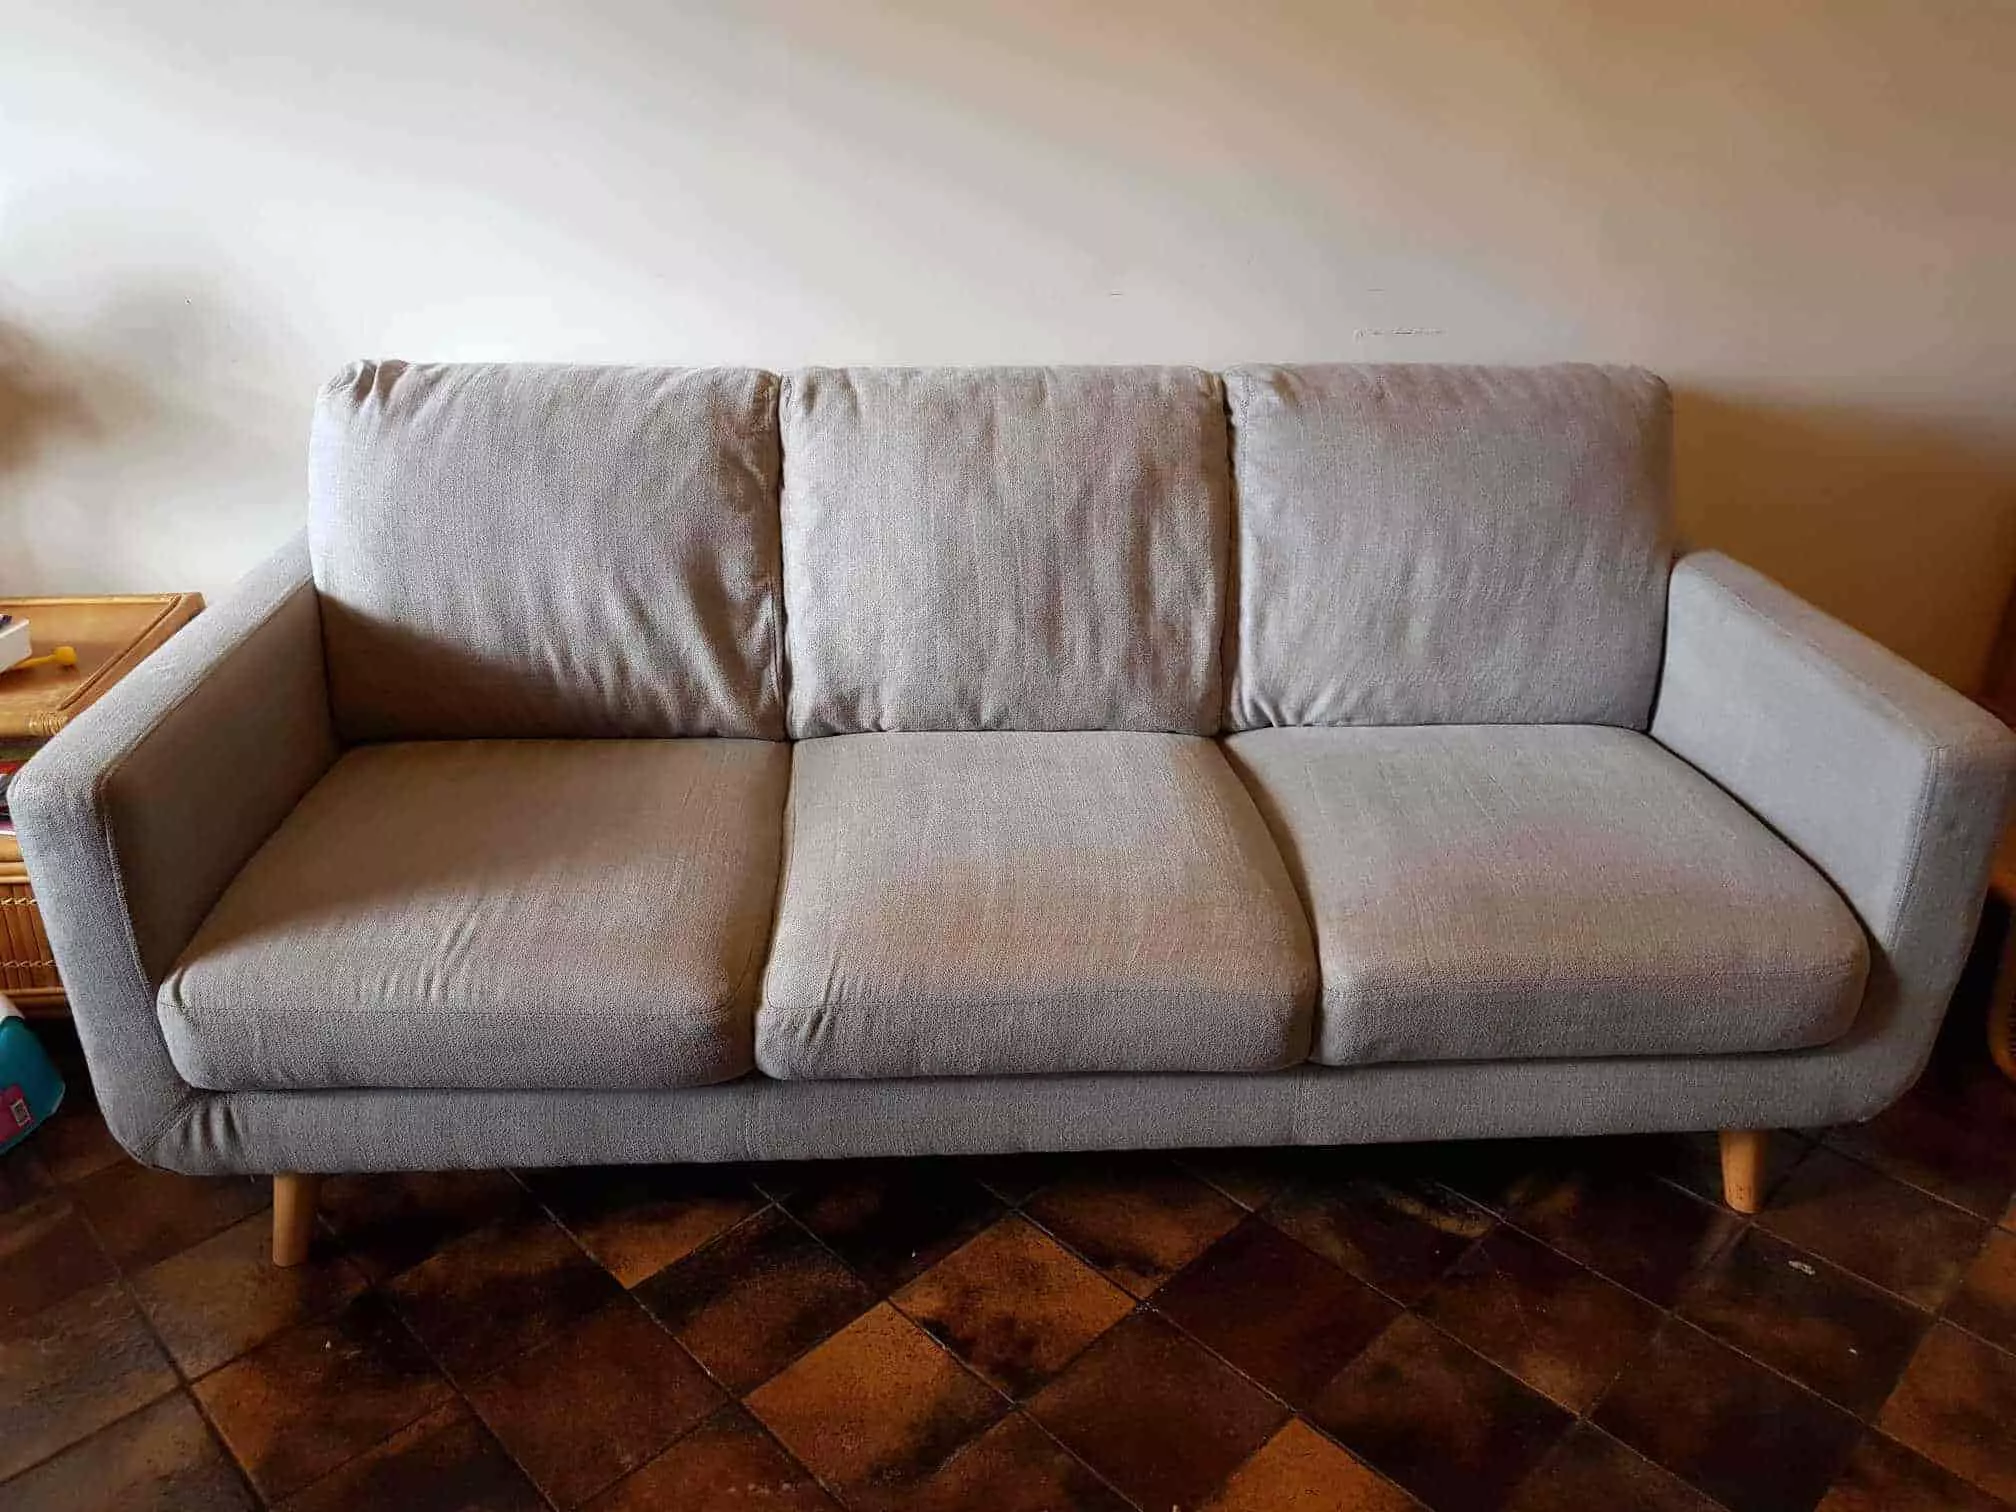 Couch-Cleaning-Service-in-Melbourne